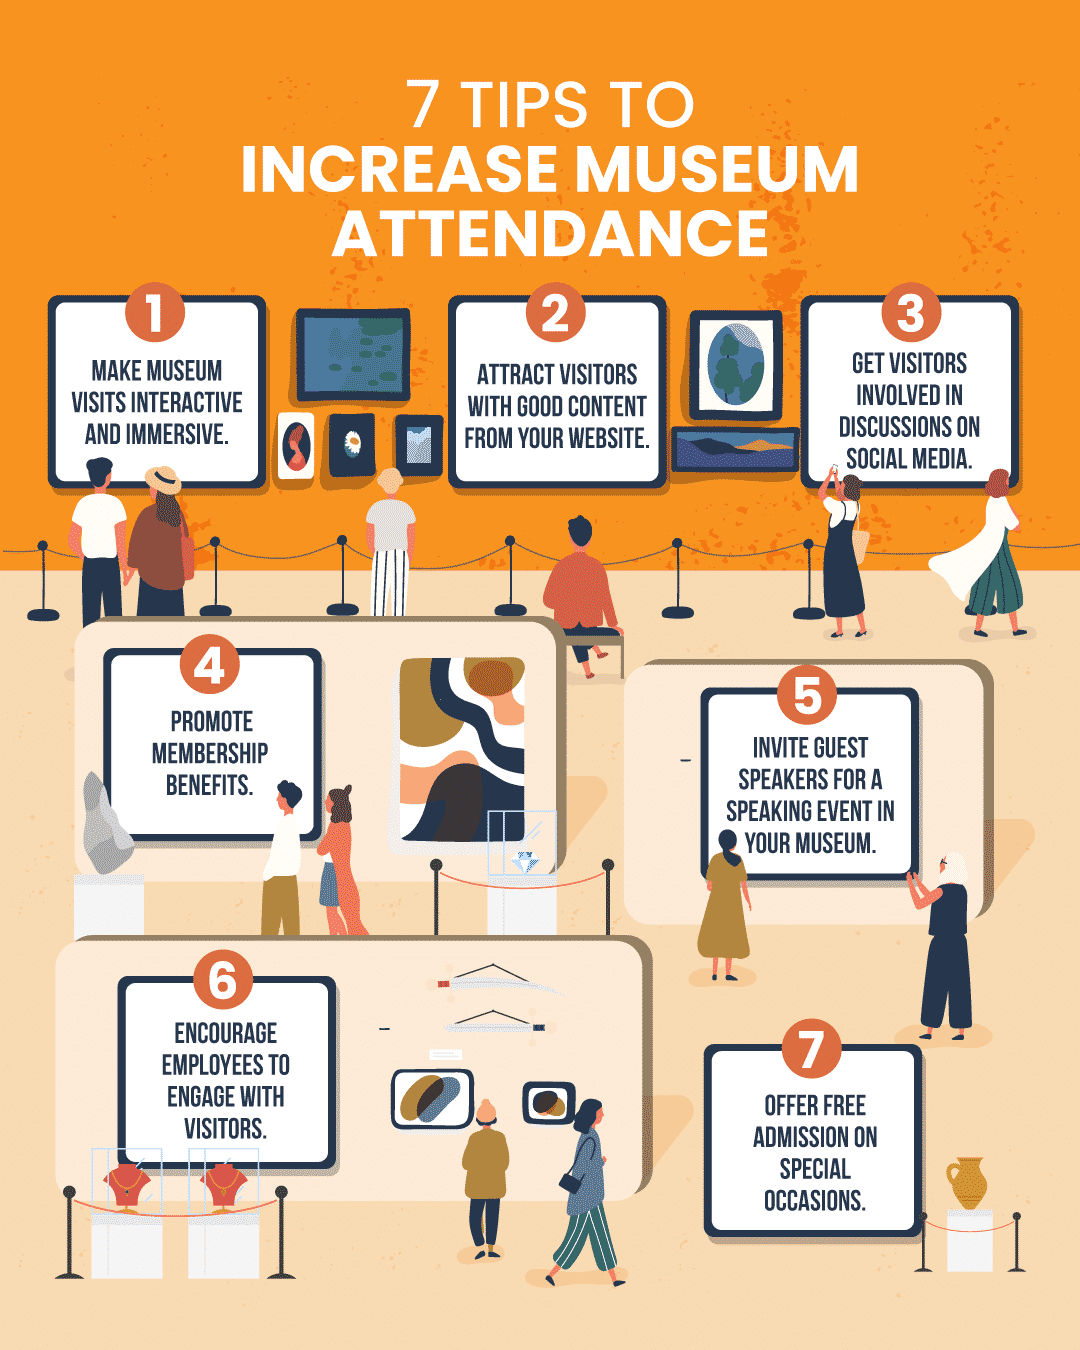 7 tips to increase museum attendance infographic with background image of people walking through exhibits in a museum